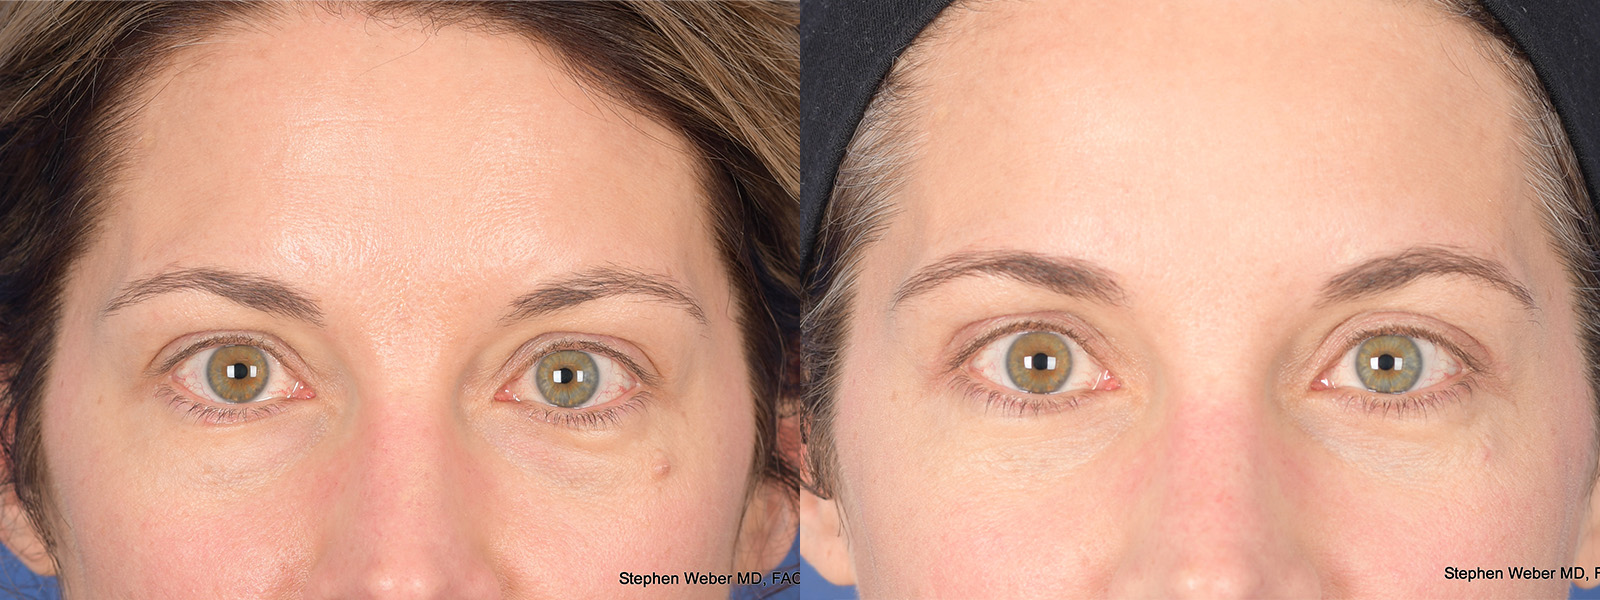 Before and After Eyelid Surgery in Denver 1